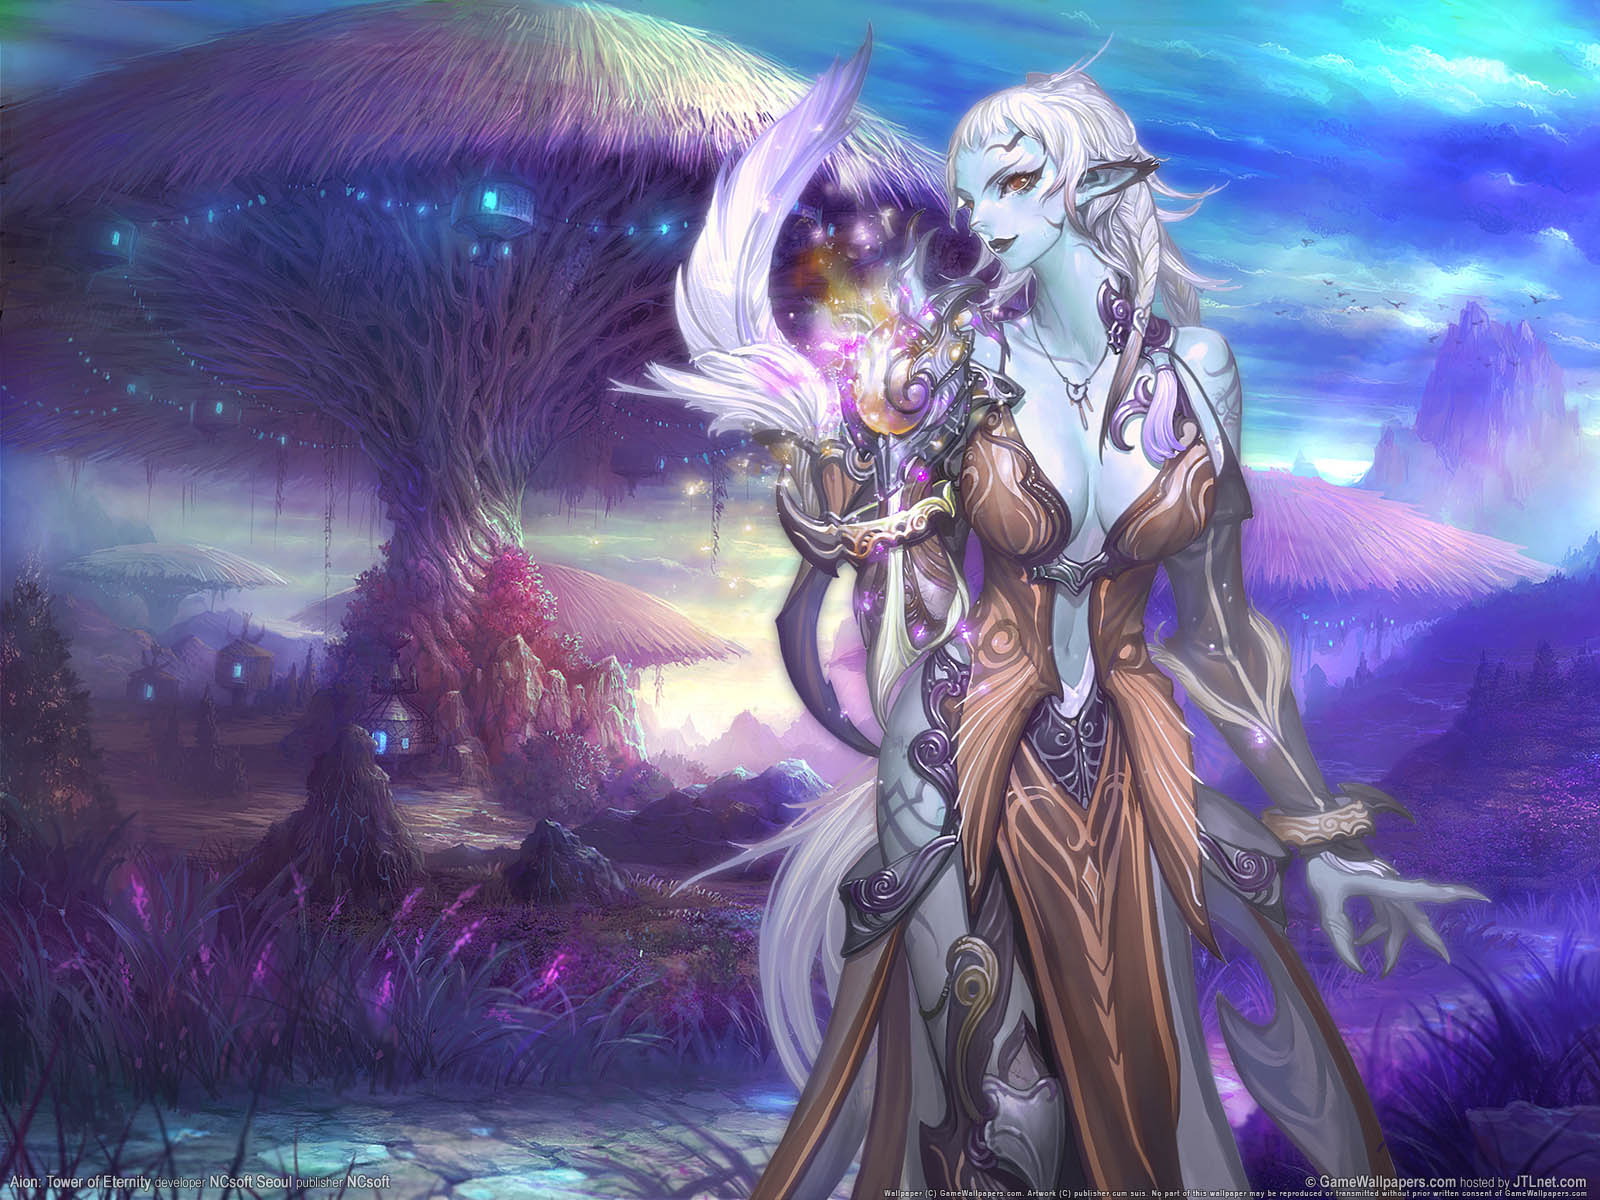 Aion%25253A Tower of Eternity wallpaper 10 1600x1200